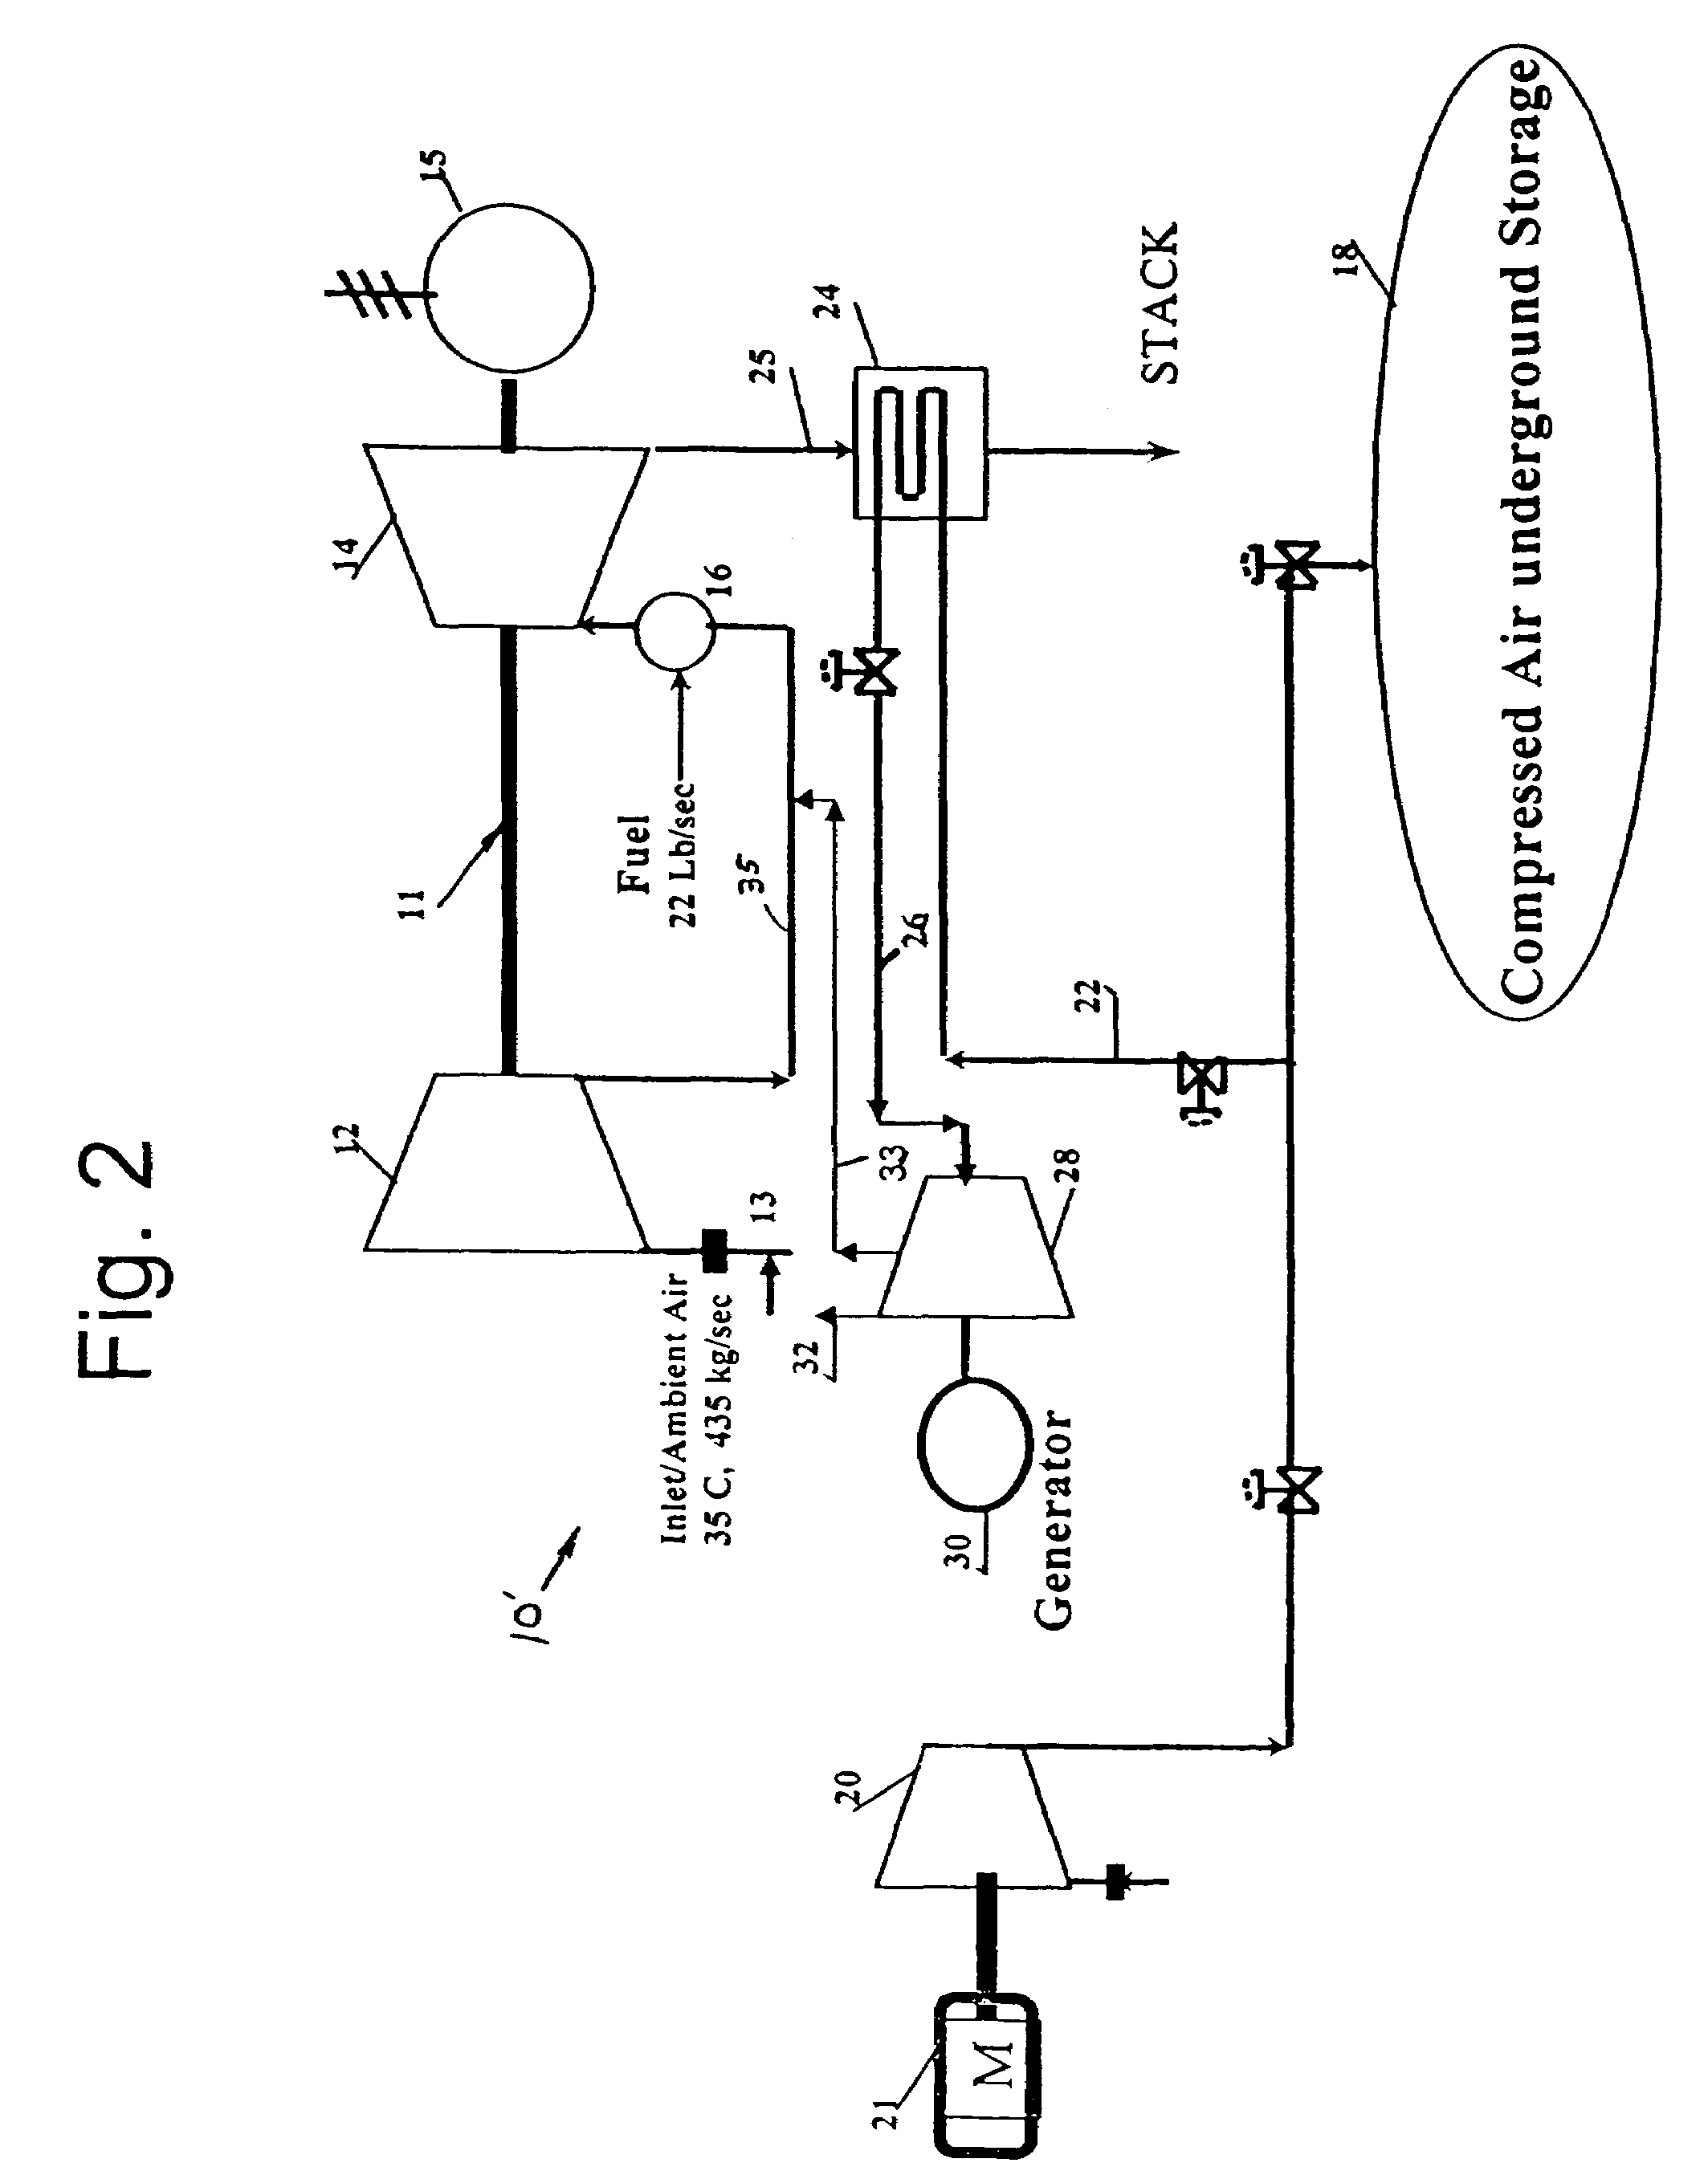 Power augmentation of combustion turbines with compressed air energy storage and additional expander with airflow extraction and injection thereof upstream of combustors